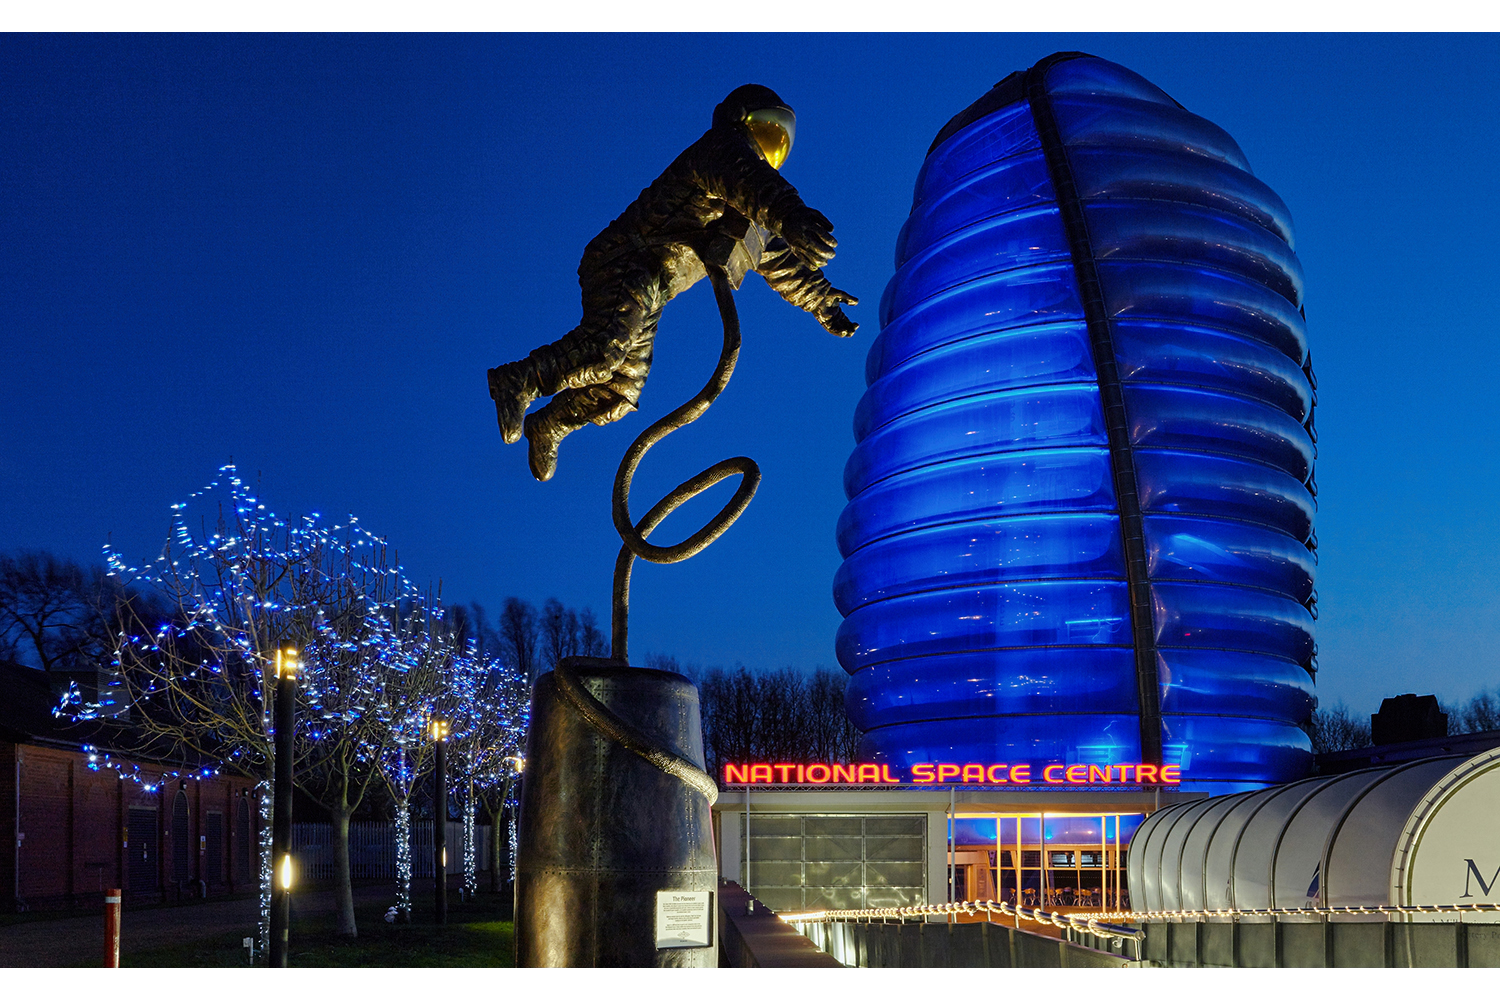 Architectural photography exterior: National Space centre, Leicester, Midlands, UK. Architect: Grimshaw architects. Image (C) Matthewlingphotography.co.uk